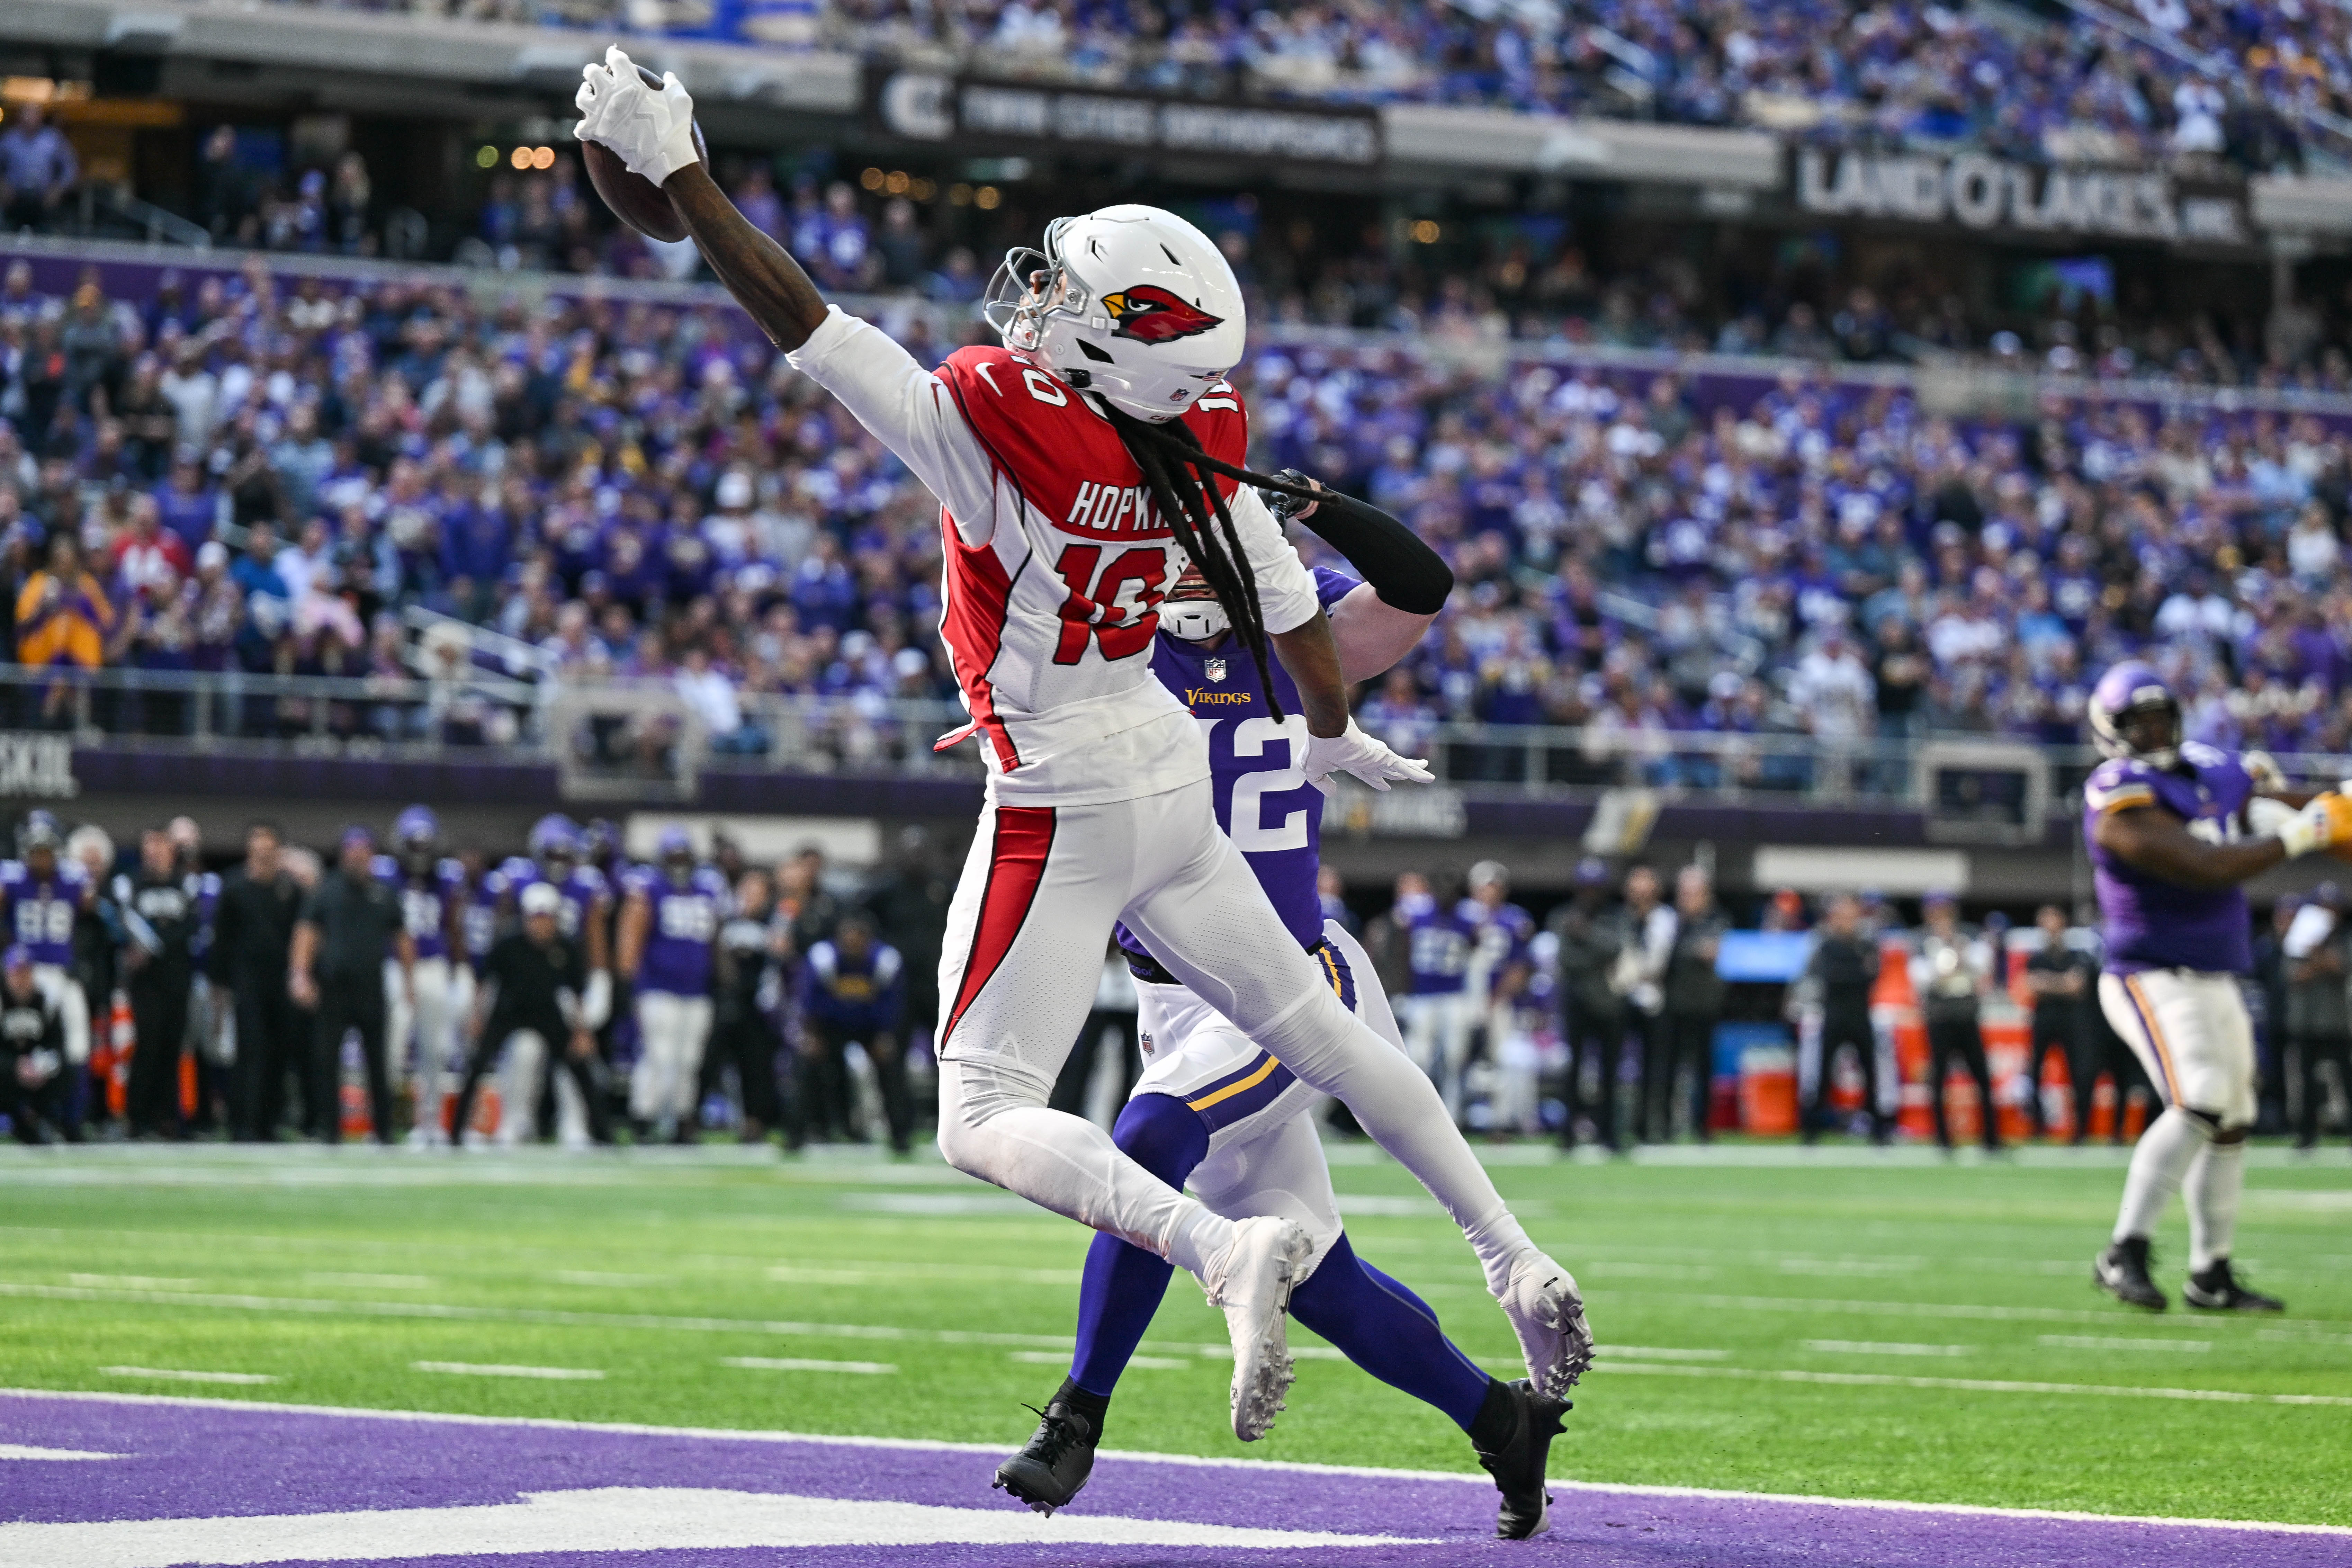 Oct 30, 2022; Minneapolis, Minnesota, USA; Arizona Cardinals wide receiver DeAndre Hopkins (10) catches a touchdown pass from quarterback Kyler Murray (not pictured) as Minnesota Vikings safety Harrison Smith (22) defends during the second quarter at U.S. Bank Stadium. Mandatory Credit: Jeffrey Becker-USA TODAY Sports